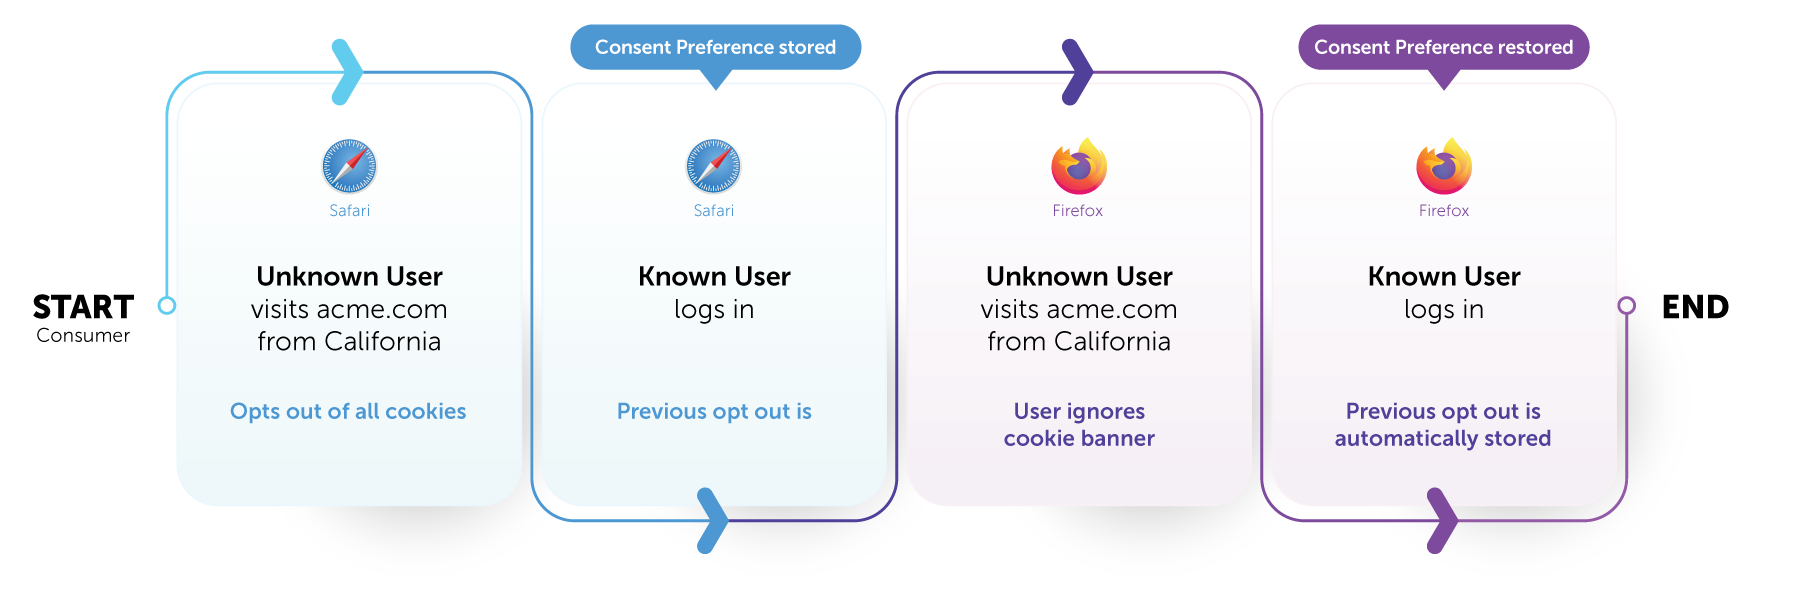 graphic depicting the order consent preference storage between logged in vs. logged out users in Safari and Firefox